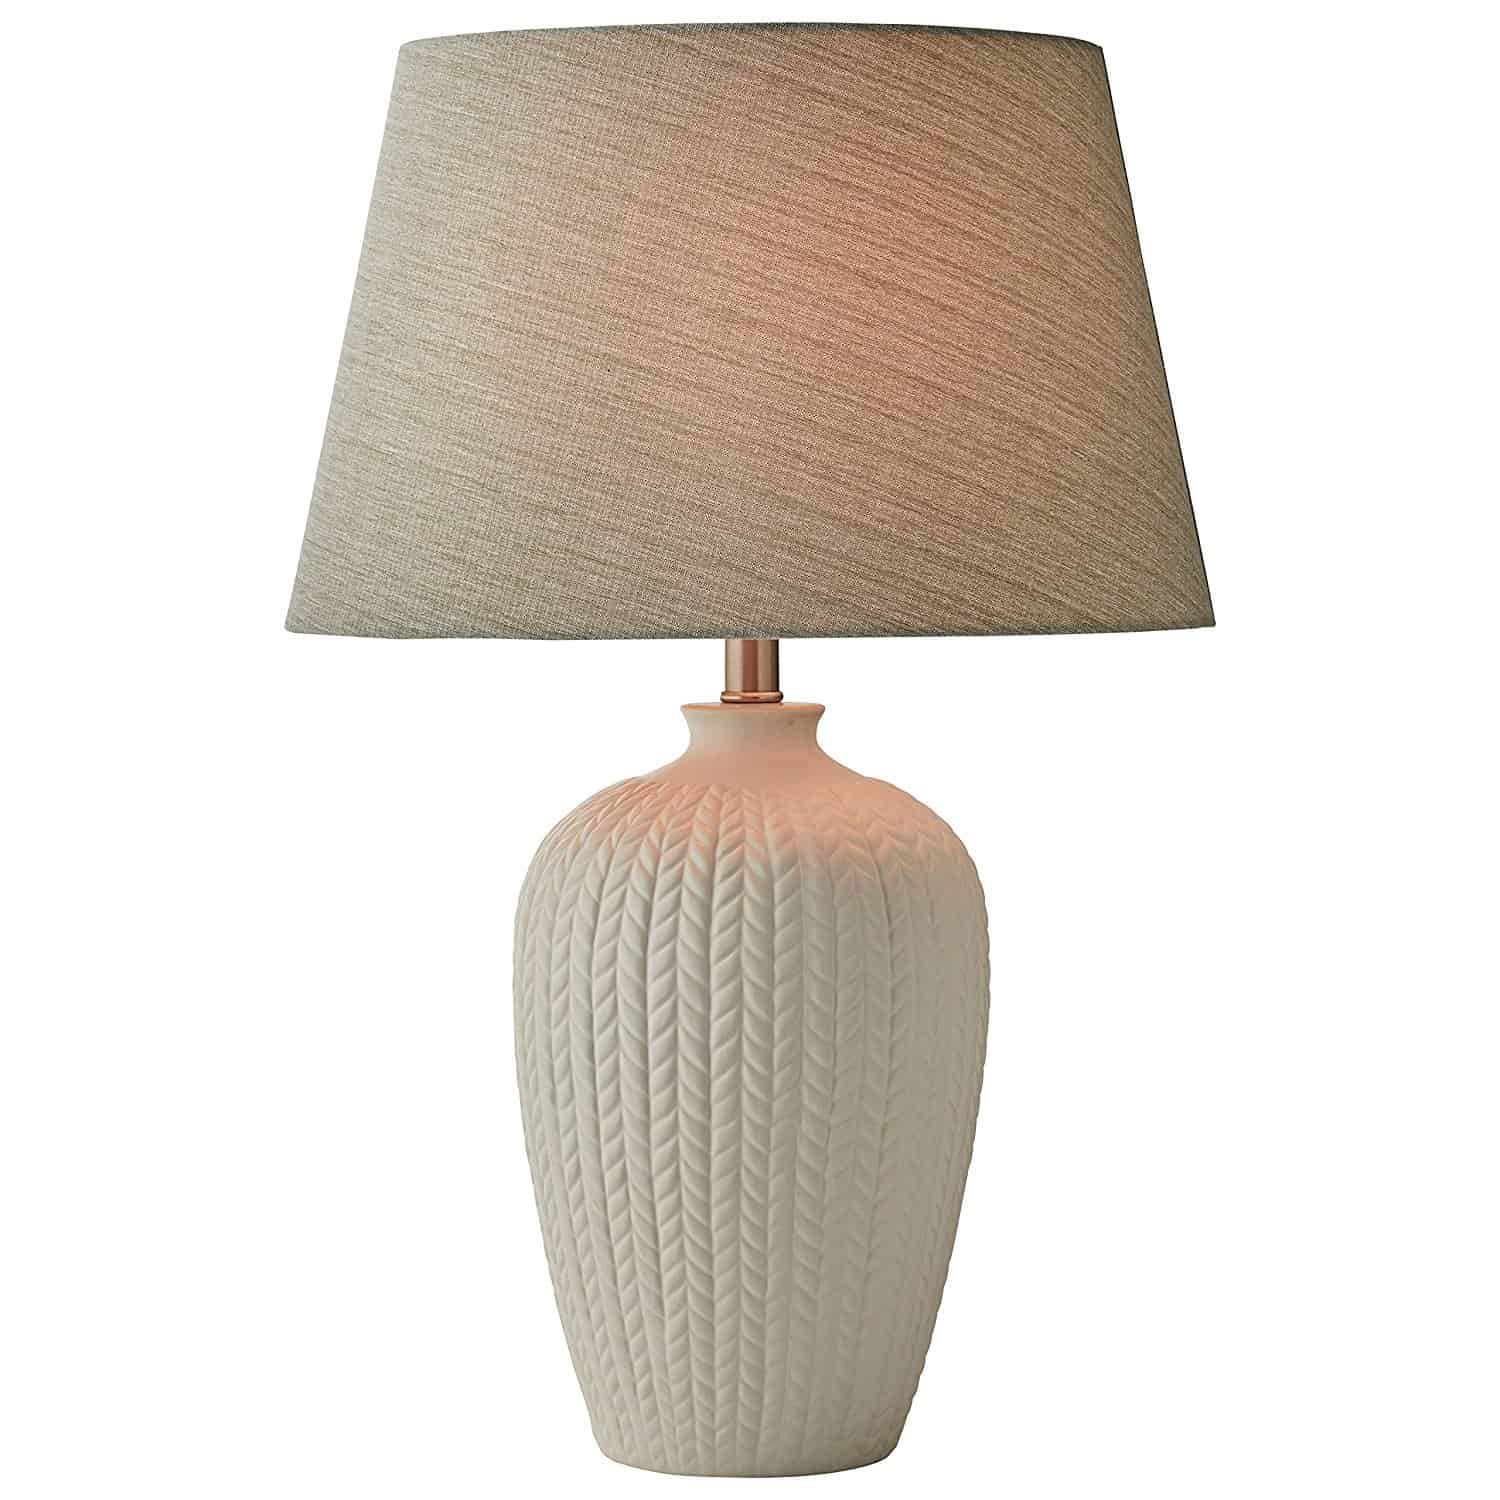  Stone & Beam Patterned Table Lamp